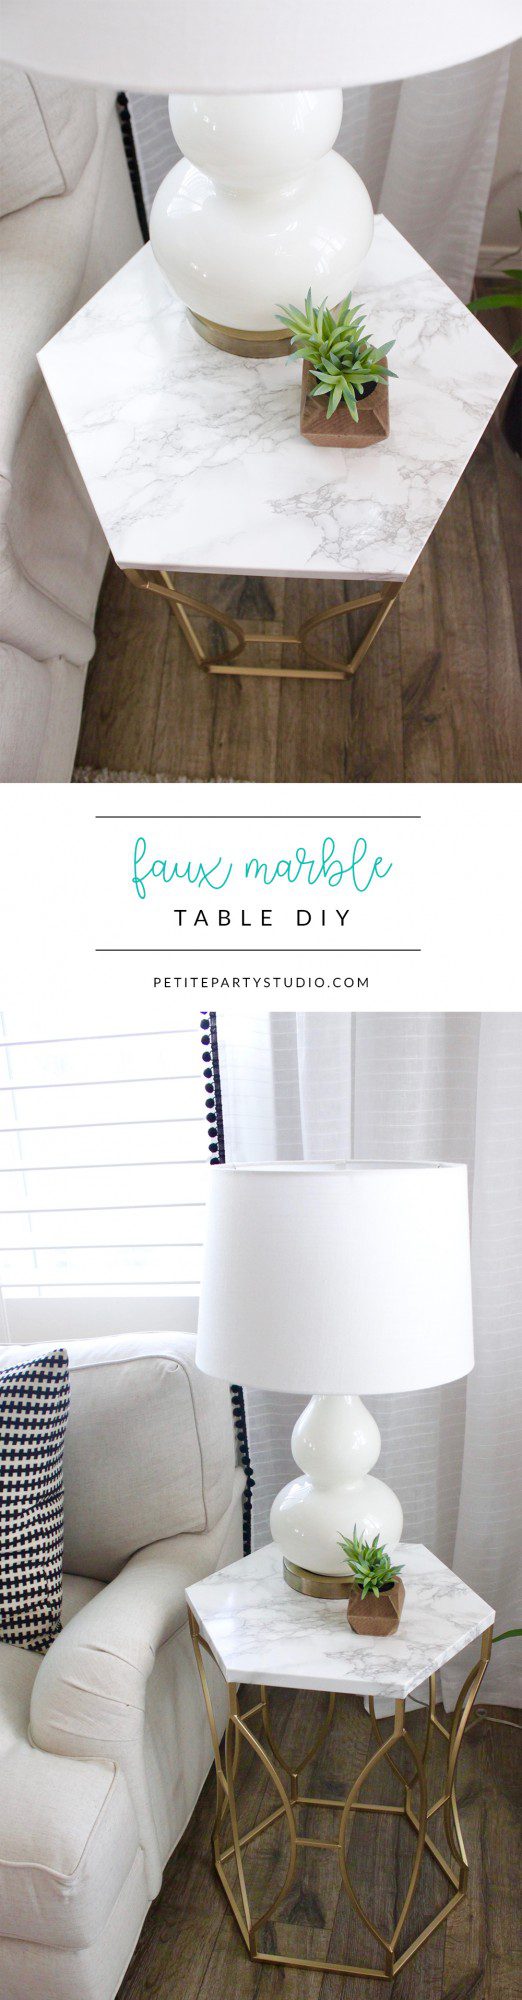 faux-marble-table-diy